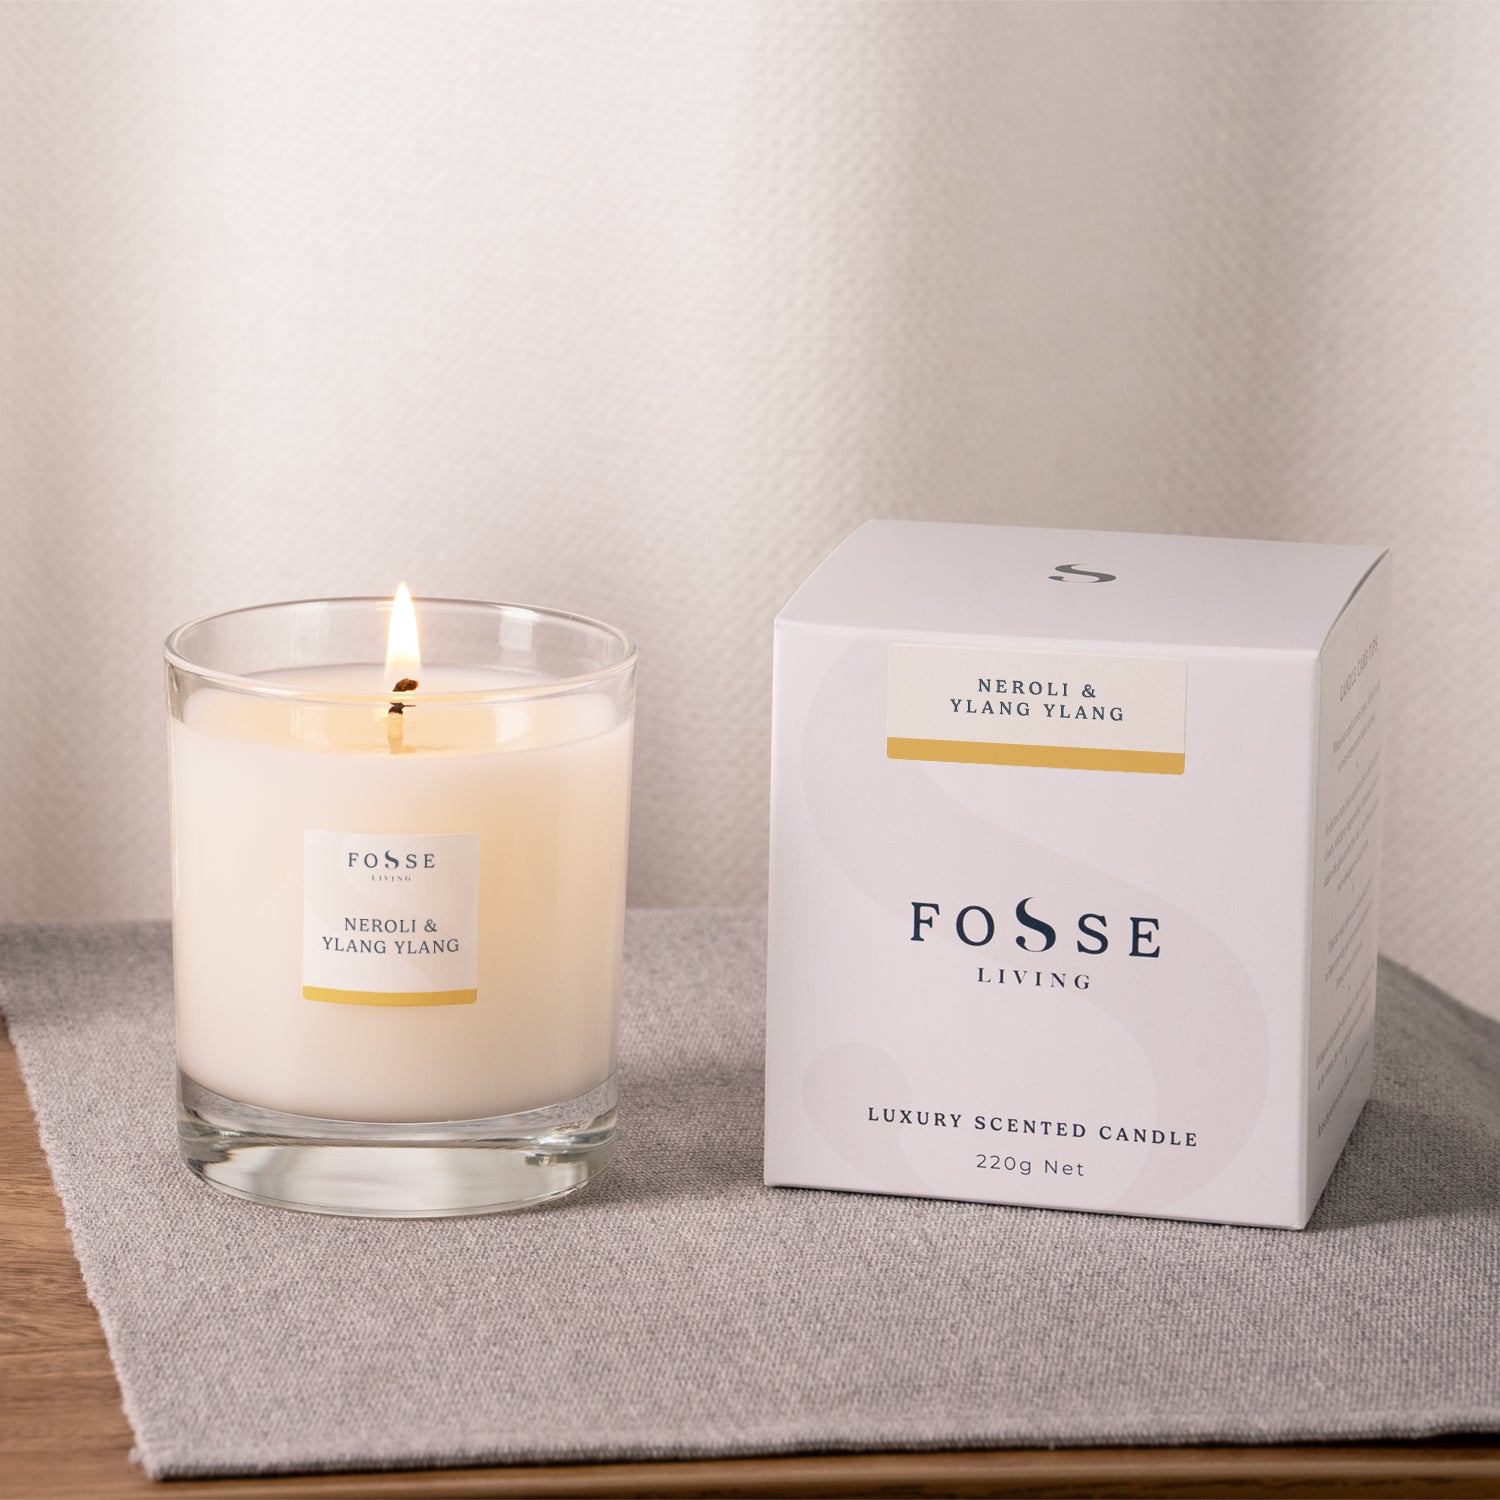 Neroli & Ylang Ylang Scented Candle - Fosse Living | Luxury Home Fragrances